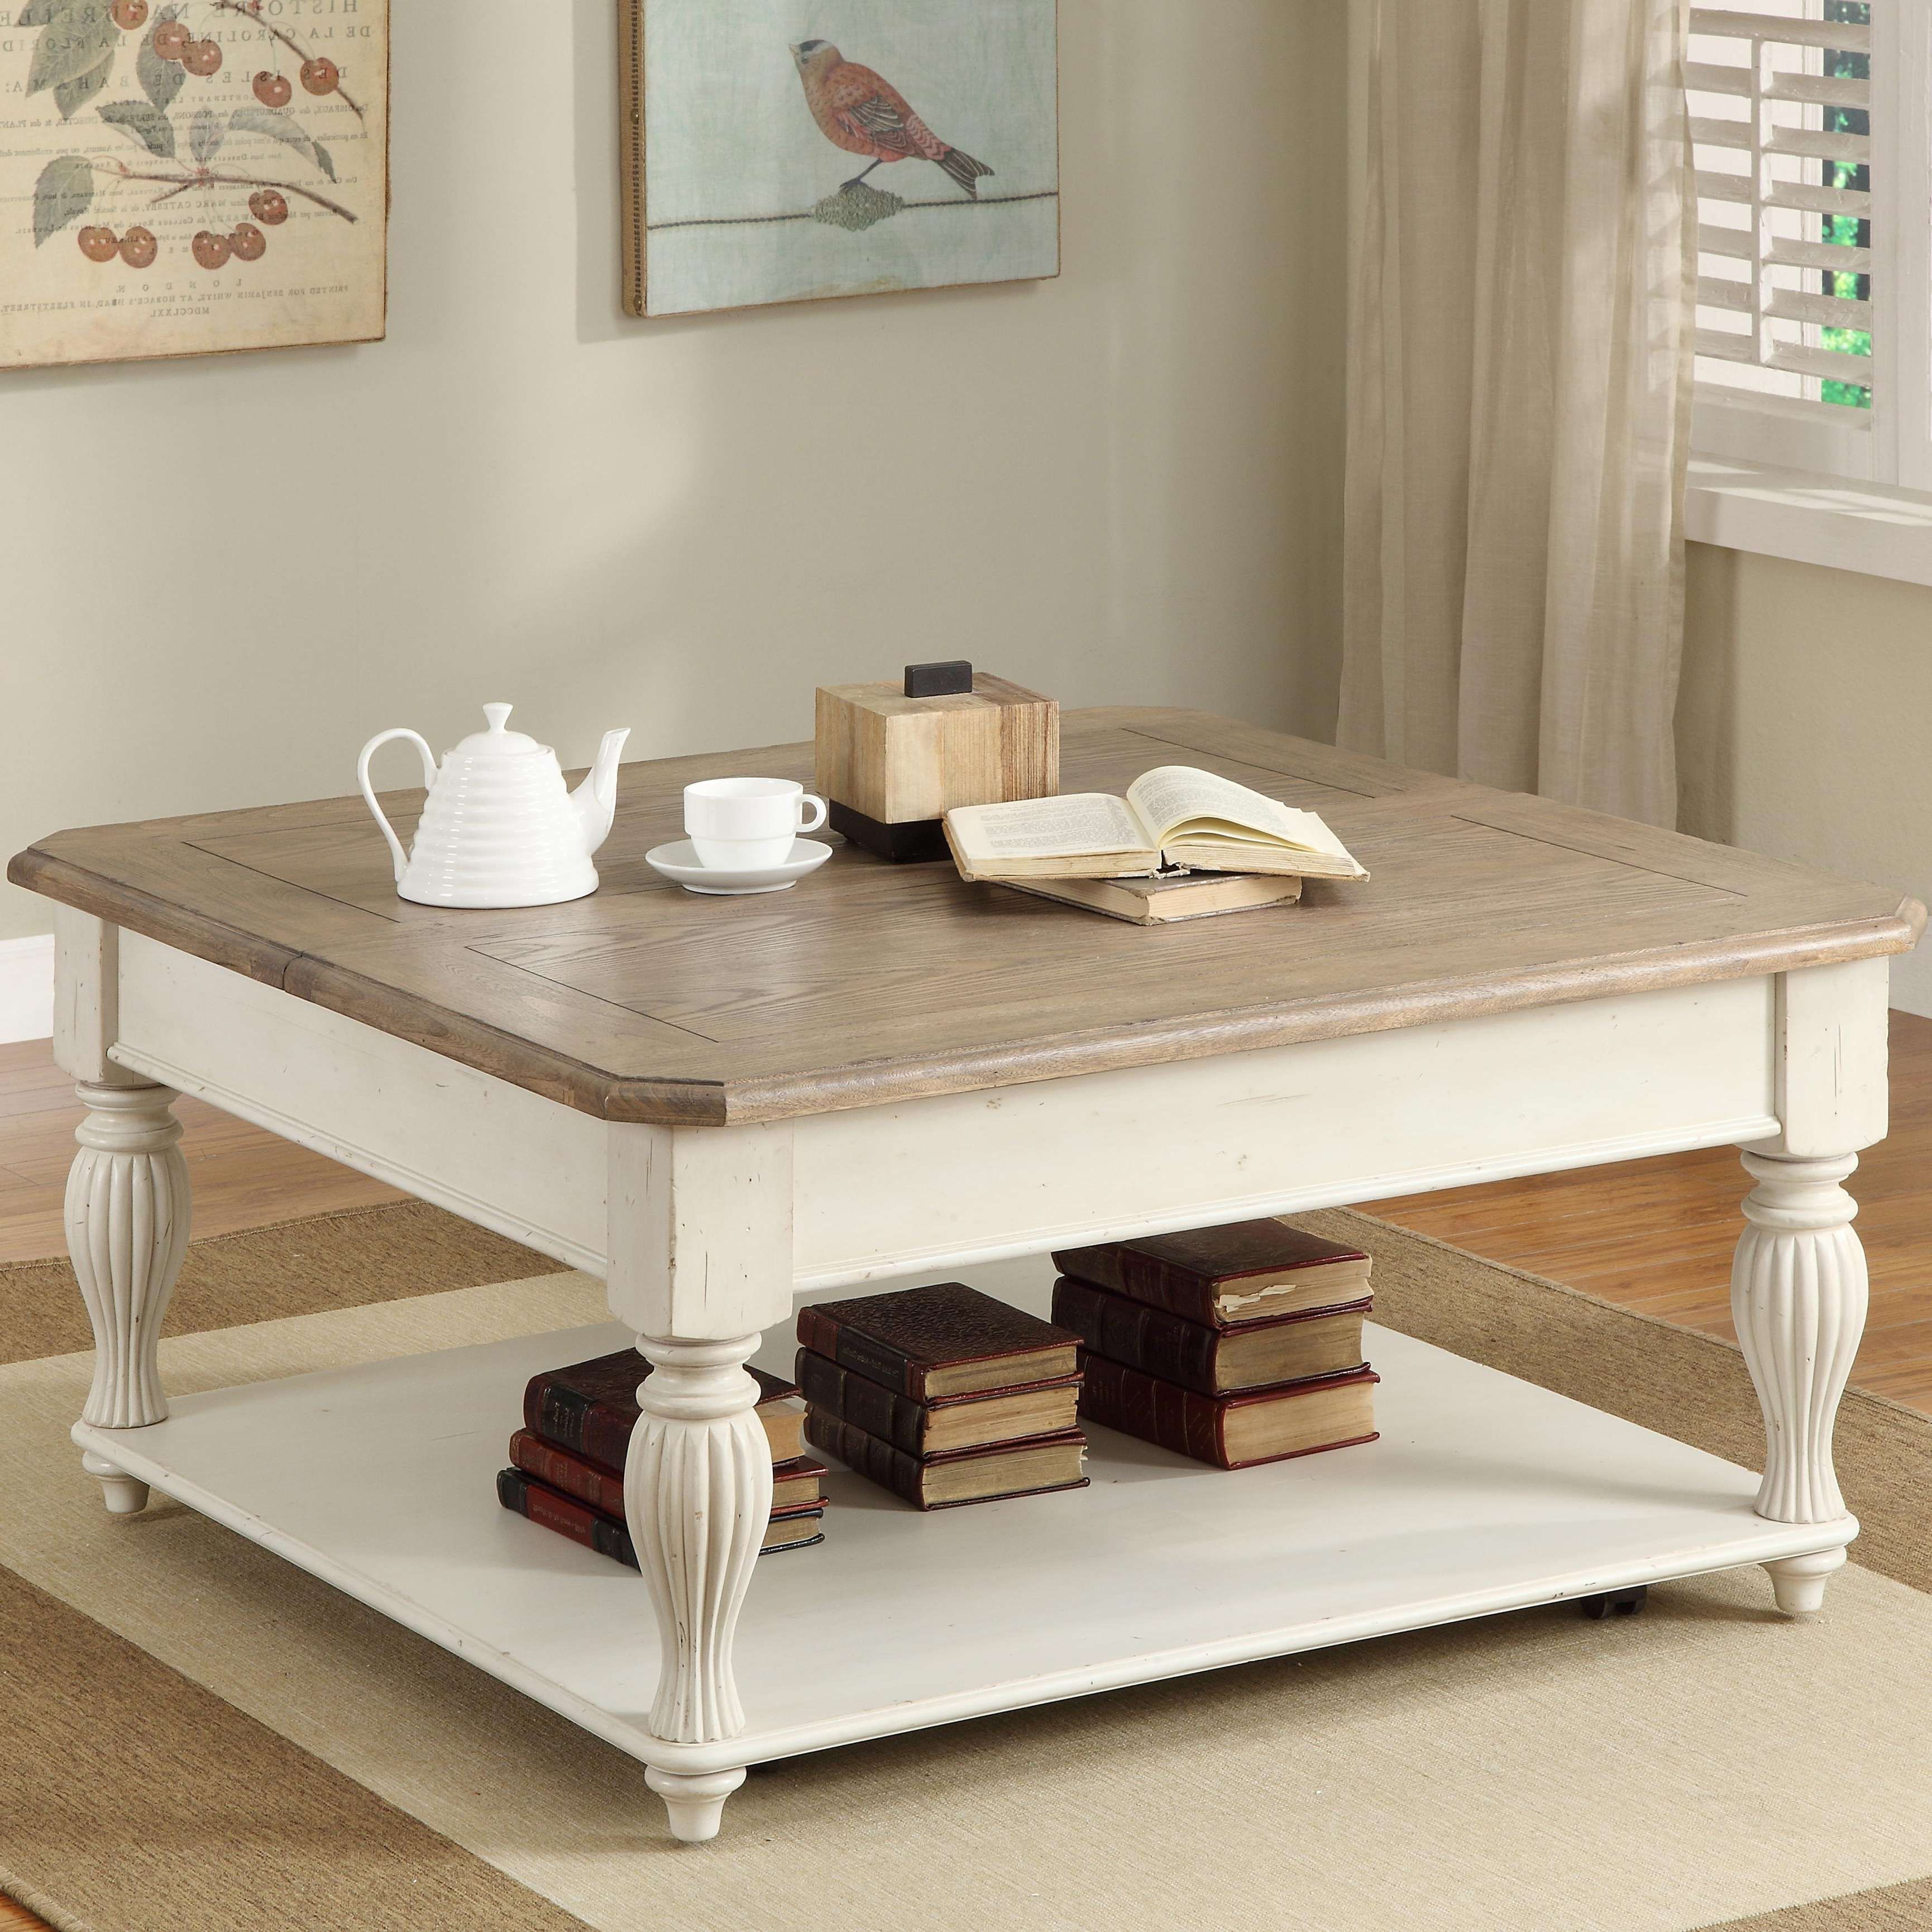 Favorite Rustic Coffee Tables With Bottom Shelf Pertaining To Square Lift Top Coffee Table With Fixed Bottom Shelfriverside (View 7 of 20)